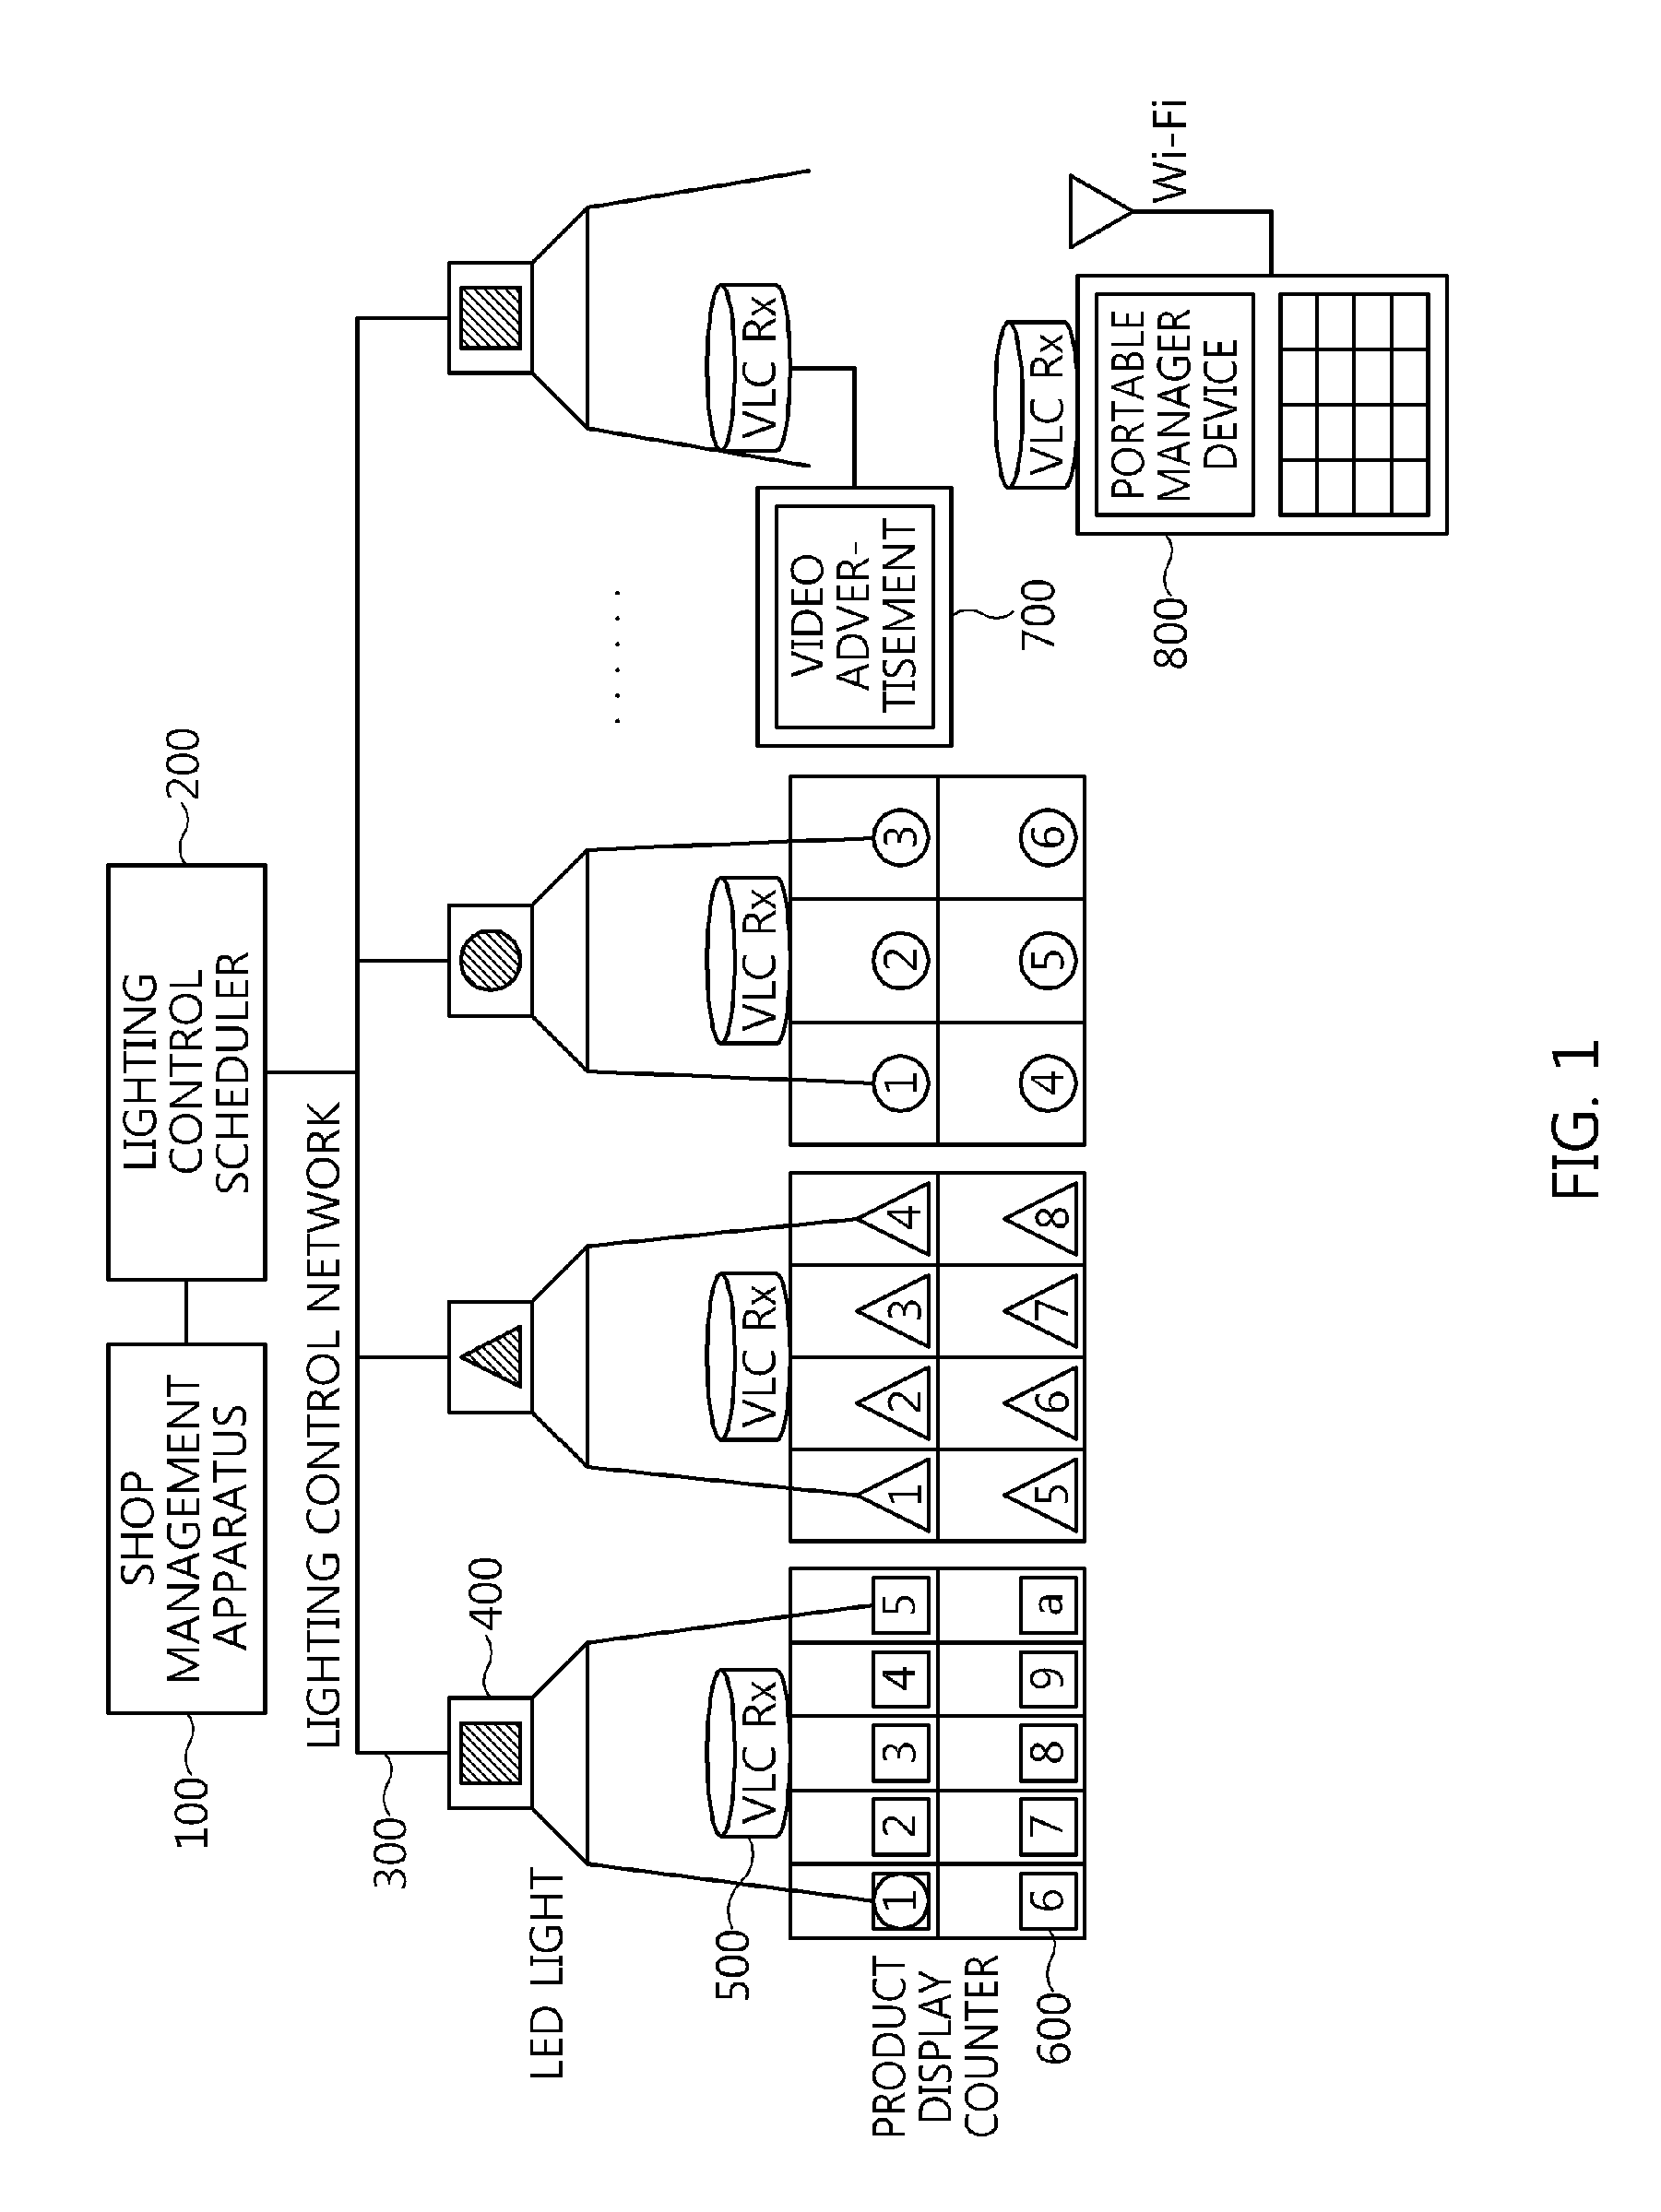 Apparatus and method for managing shop using lighting network and visible light communication